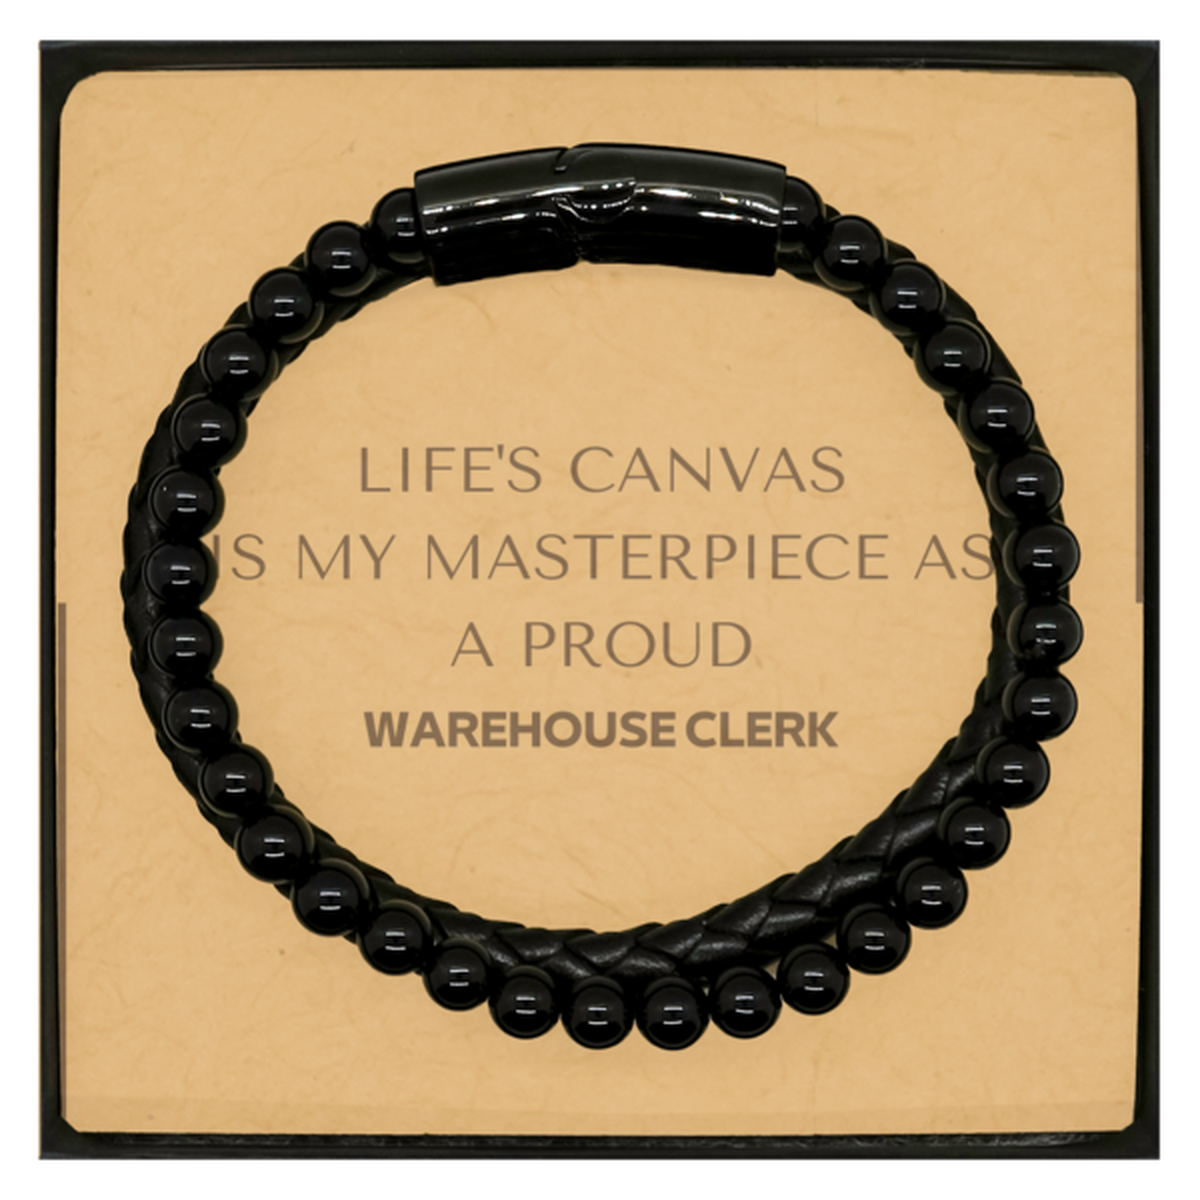 Proud Warehouse Clerk Gifts, Life's canvas is my masterpiece, Epic Birthday Christmas Unique Stone Leather Bracelets For Warehouse Clerk, Coworkers, Men, Women, Friends